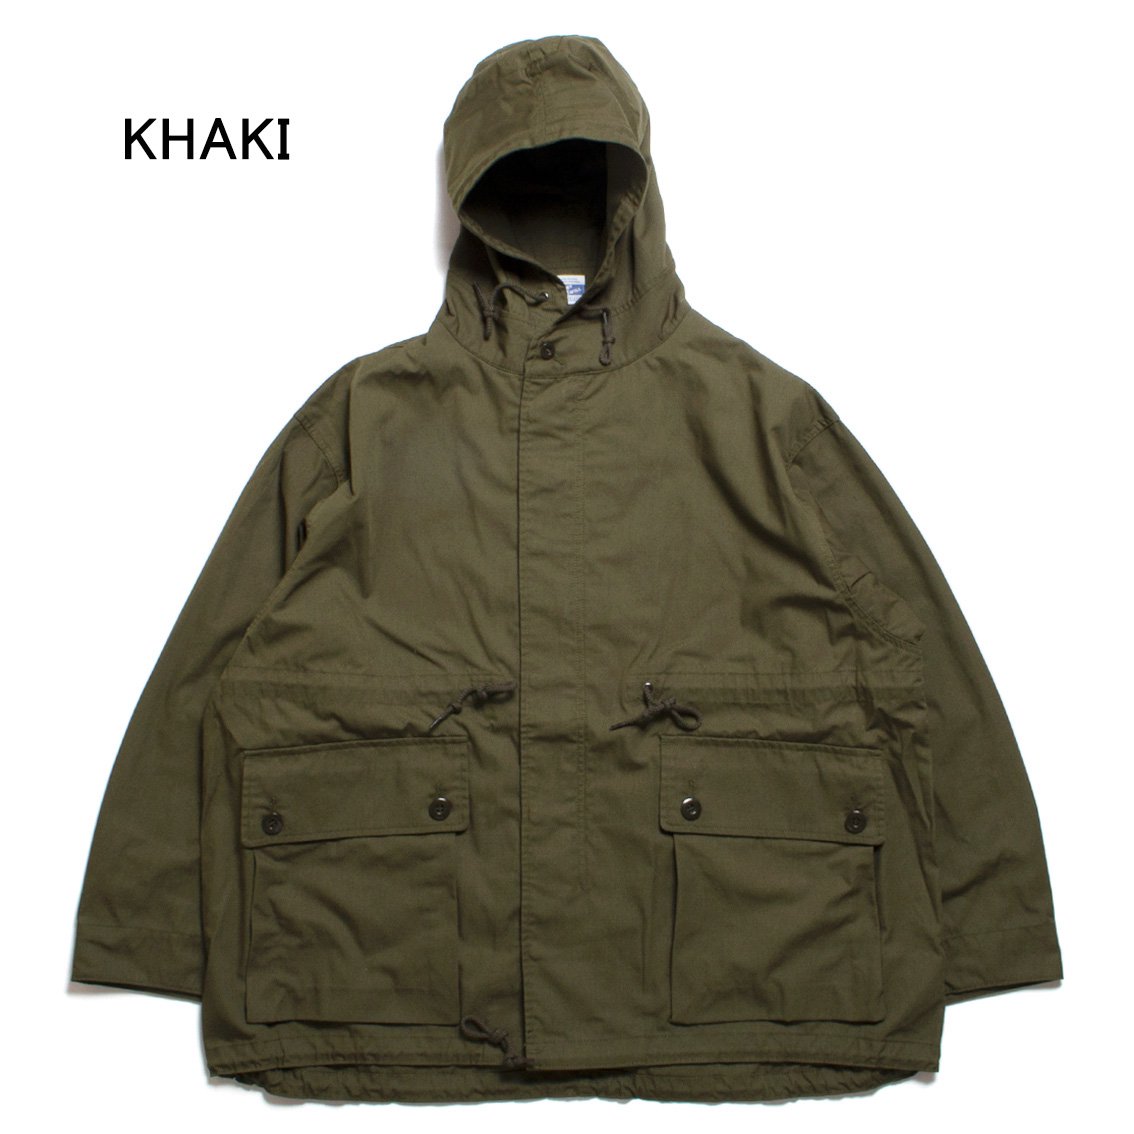 ARMY TWILL / アーミーツイル] COTTON/POLYESTER PLAIN HOODED COAT 